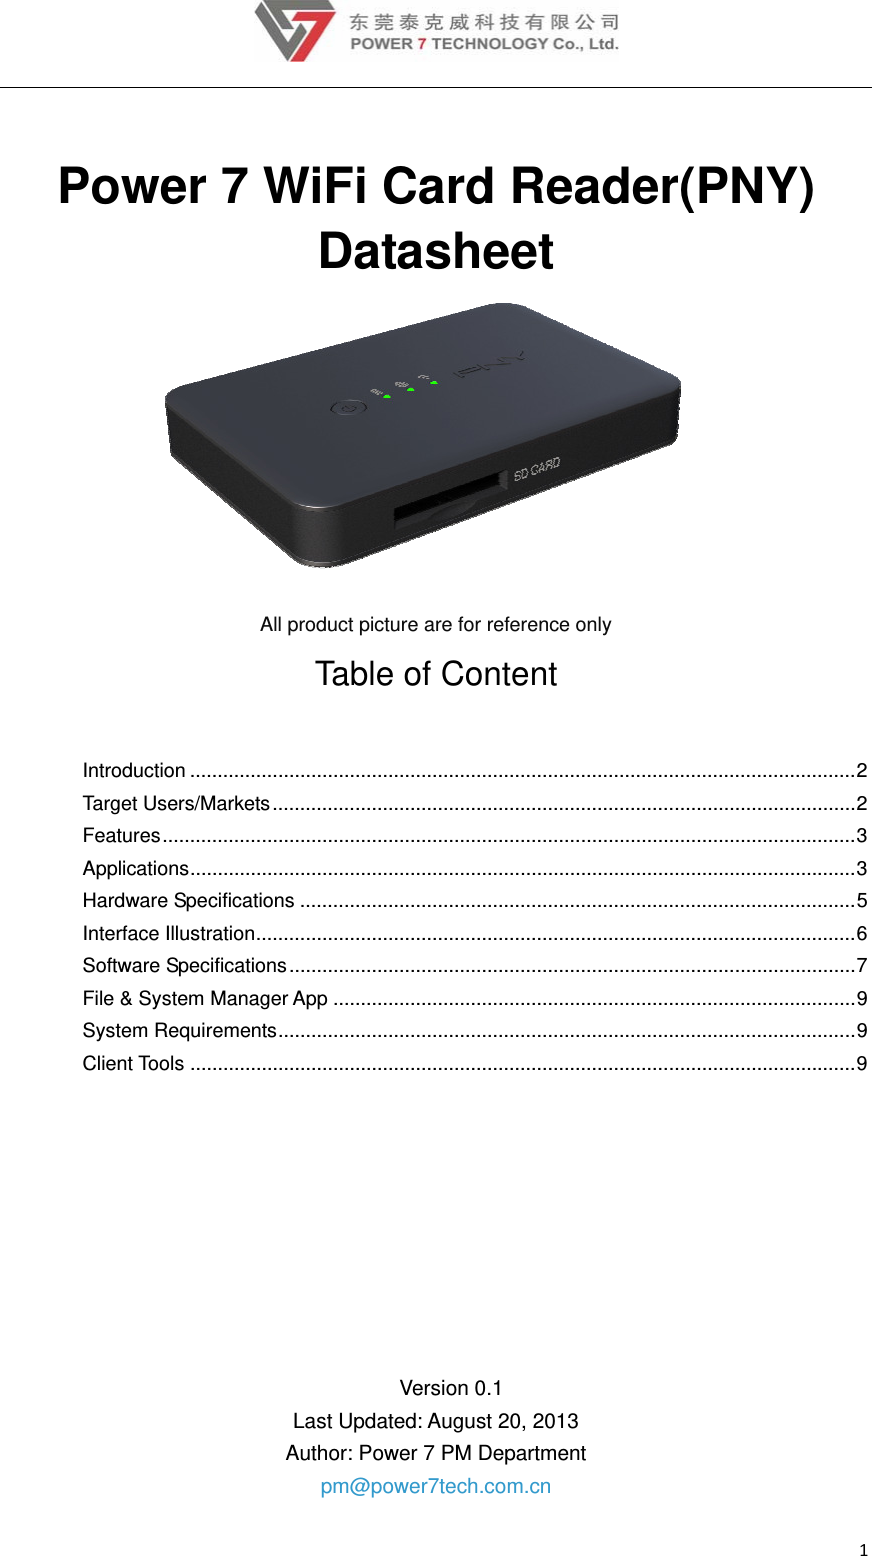 1 Power 7 WiFi Card Reader(PNY) Datasheet  All product picture are for reference only Table of Content Introduction ......................................................................................................................... 2 Target Users/Markets .......................................................................................................... 2  Features .............................................................................................................................. 3 Applications ......................................................................................................................... 3 Hardware Specifications ..................................................................................................... 5 Interface Illustration ............................................................................................................. 6 Software Specifications ....................................................................................................... 7  File &amp; System Manager App ............................................................................................... 9 System Requirements ......................................................................................................... 9 Client Tools ......................................................................................................................... 9    Version 0.1 Last Updated: August 20, 2013 Author: Power 7 PM Department pm@power7tech.com.cn 